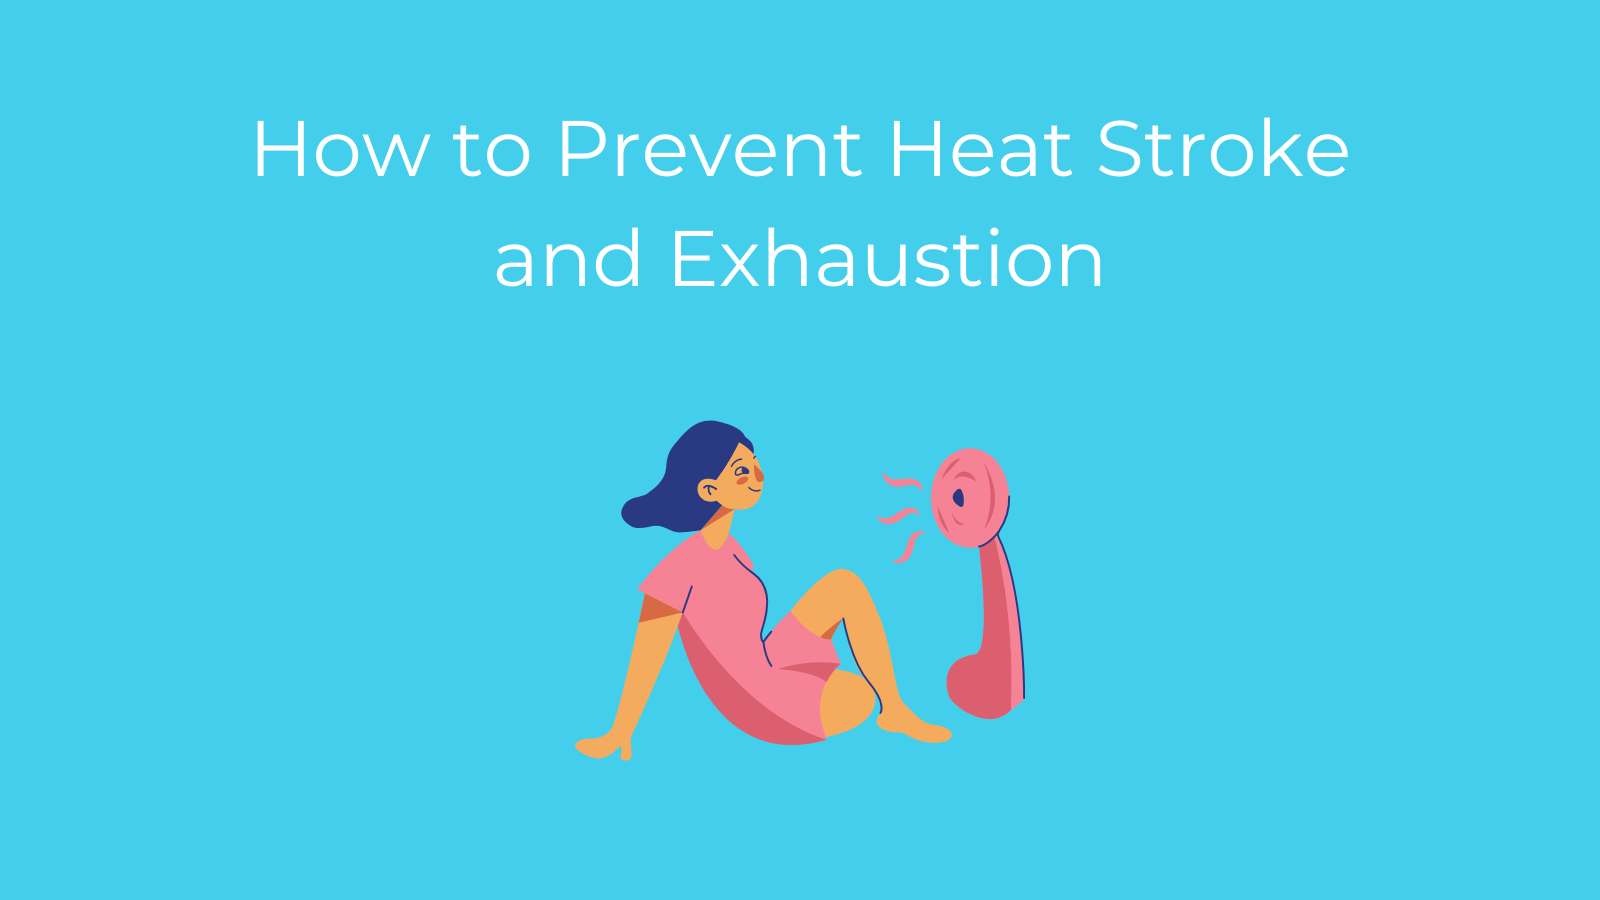 How to Prevent Heat Stroke and Exhaustion